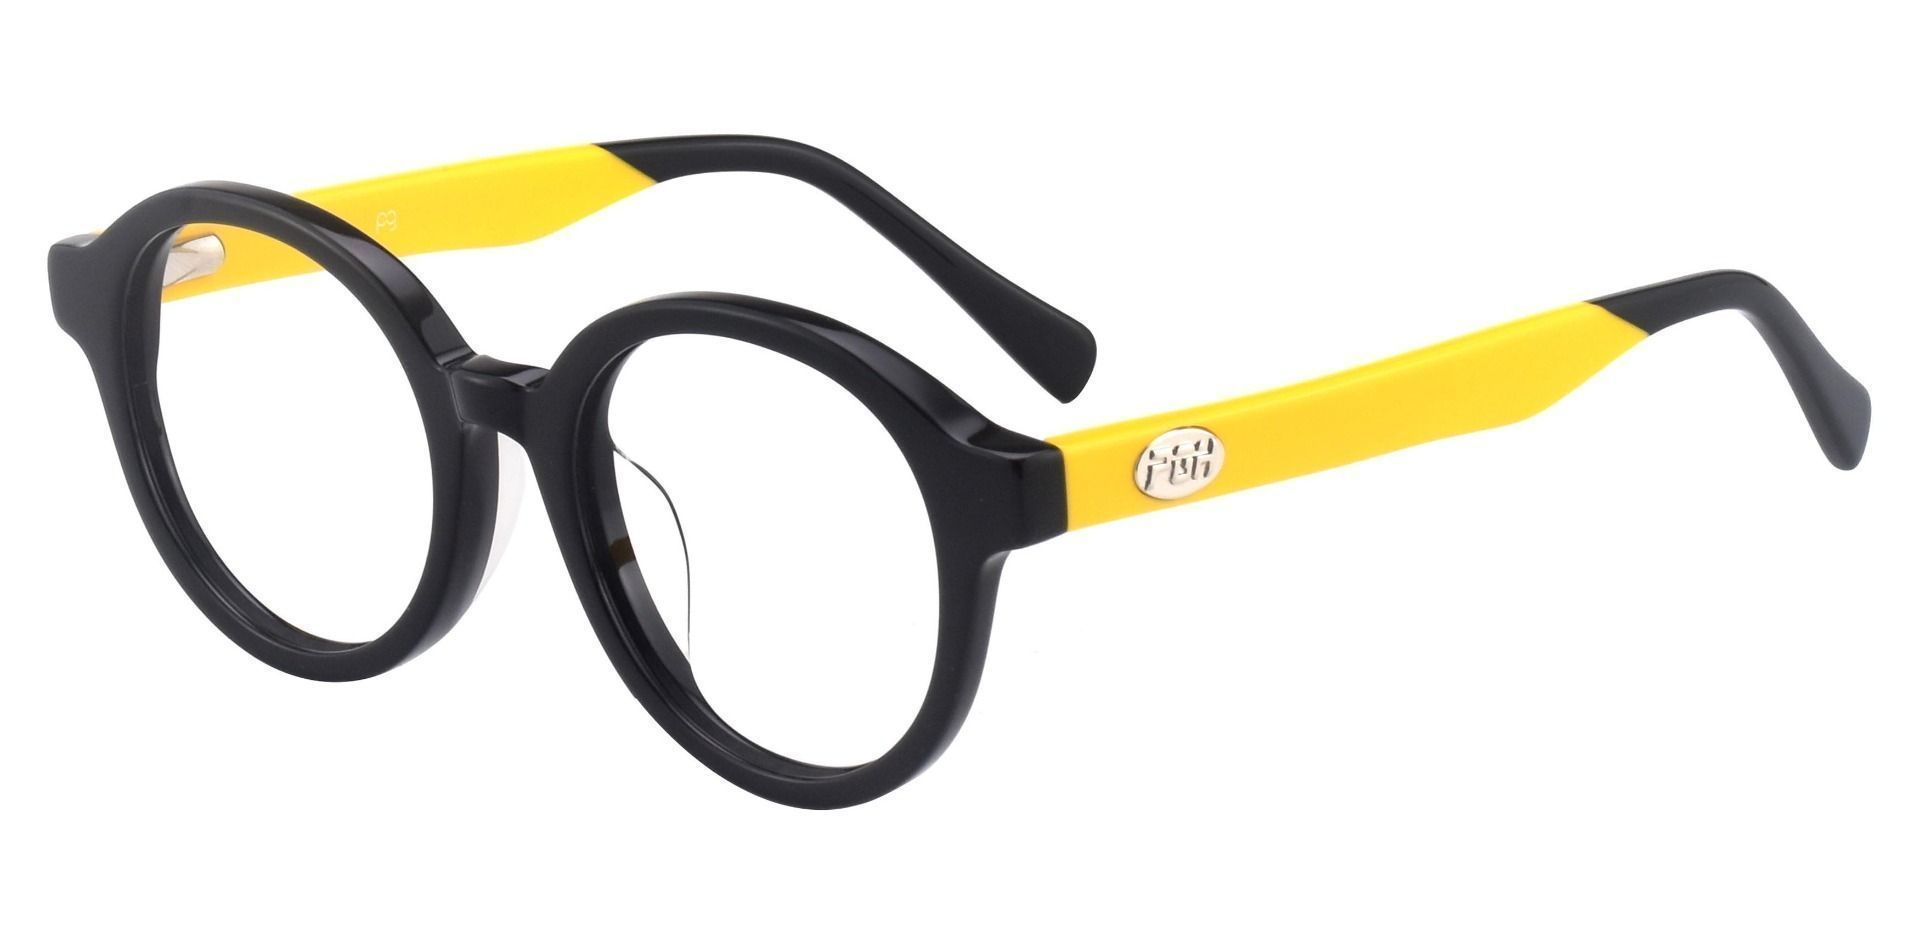 Steel City Round Non-Rx Glasses - The Frame Is Black And Gold